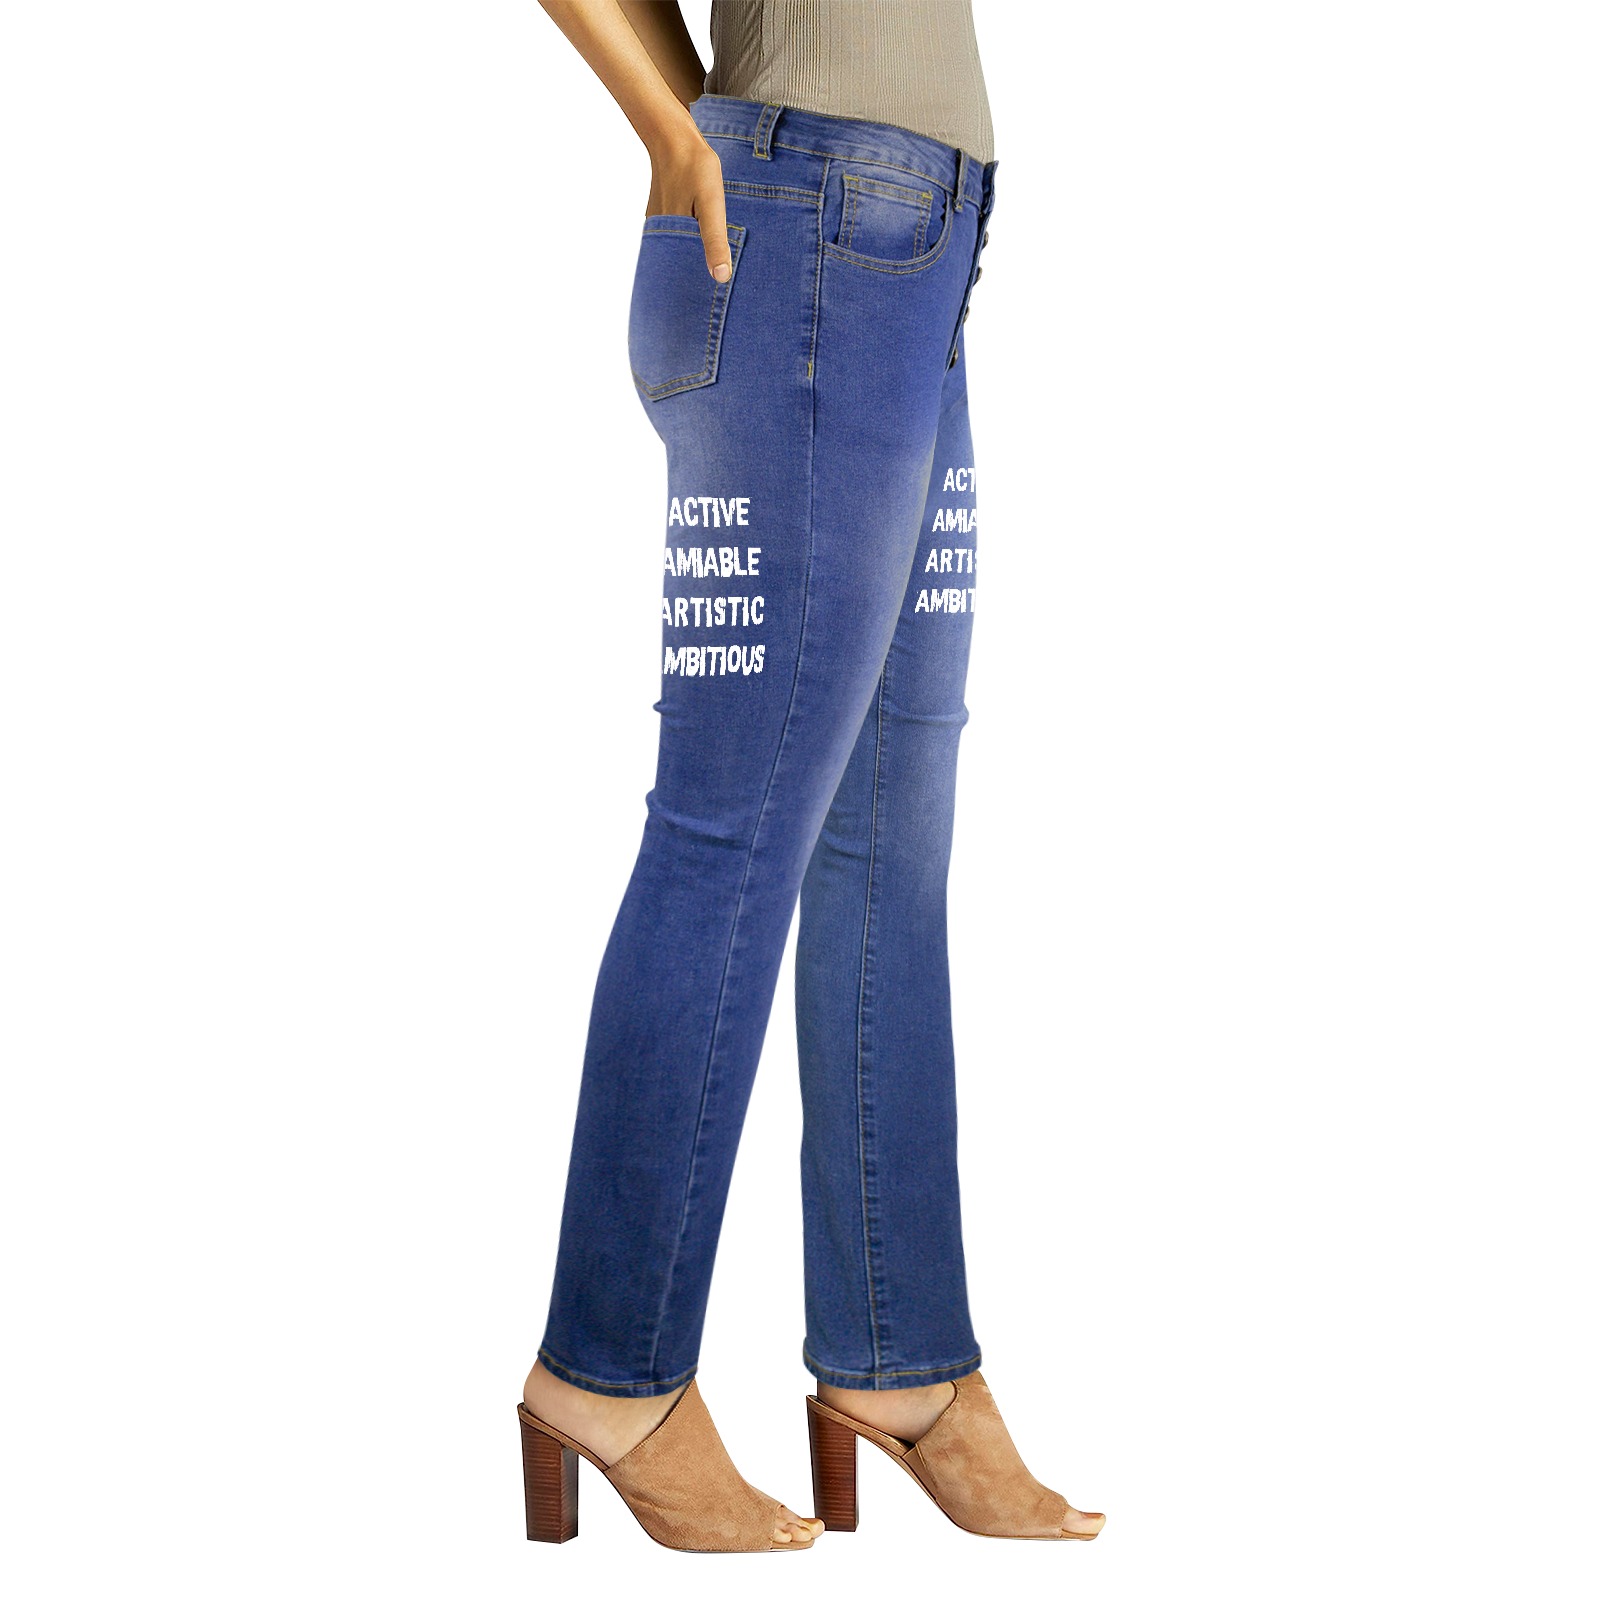 Active, amiable, artistic, ambitious white words. Women's Jeans (Front&Back Printing)